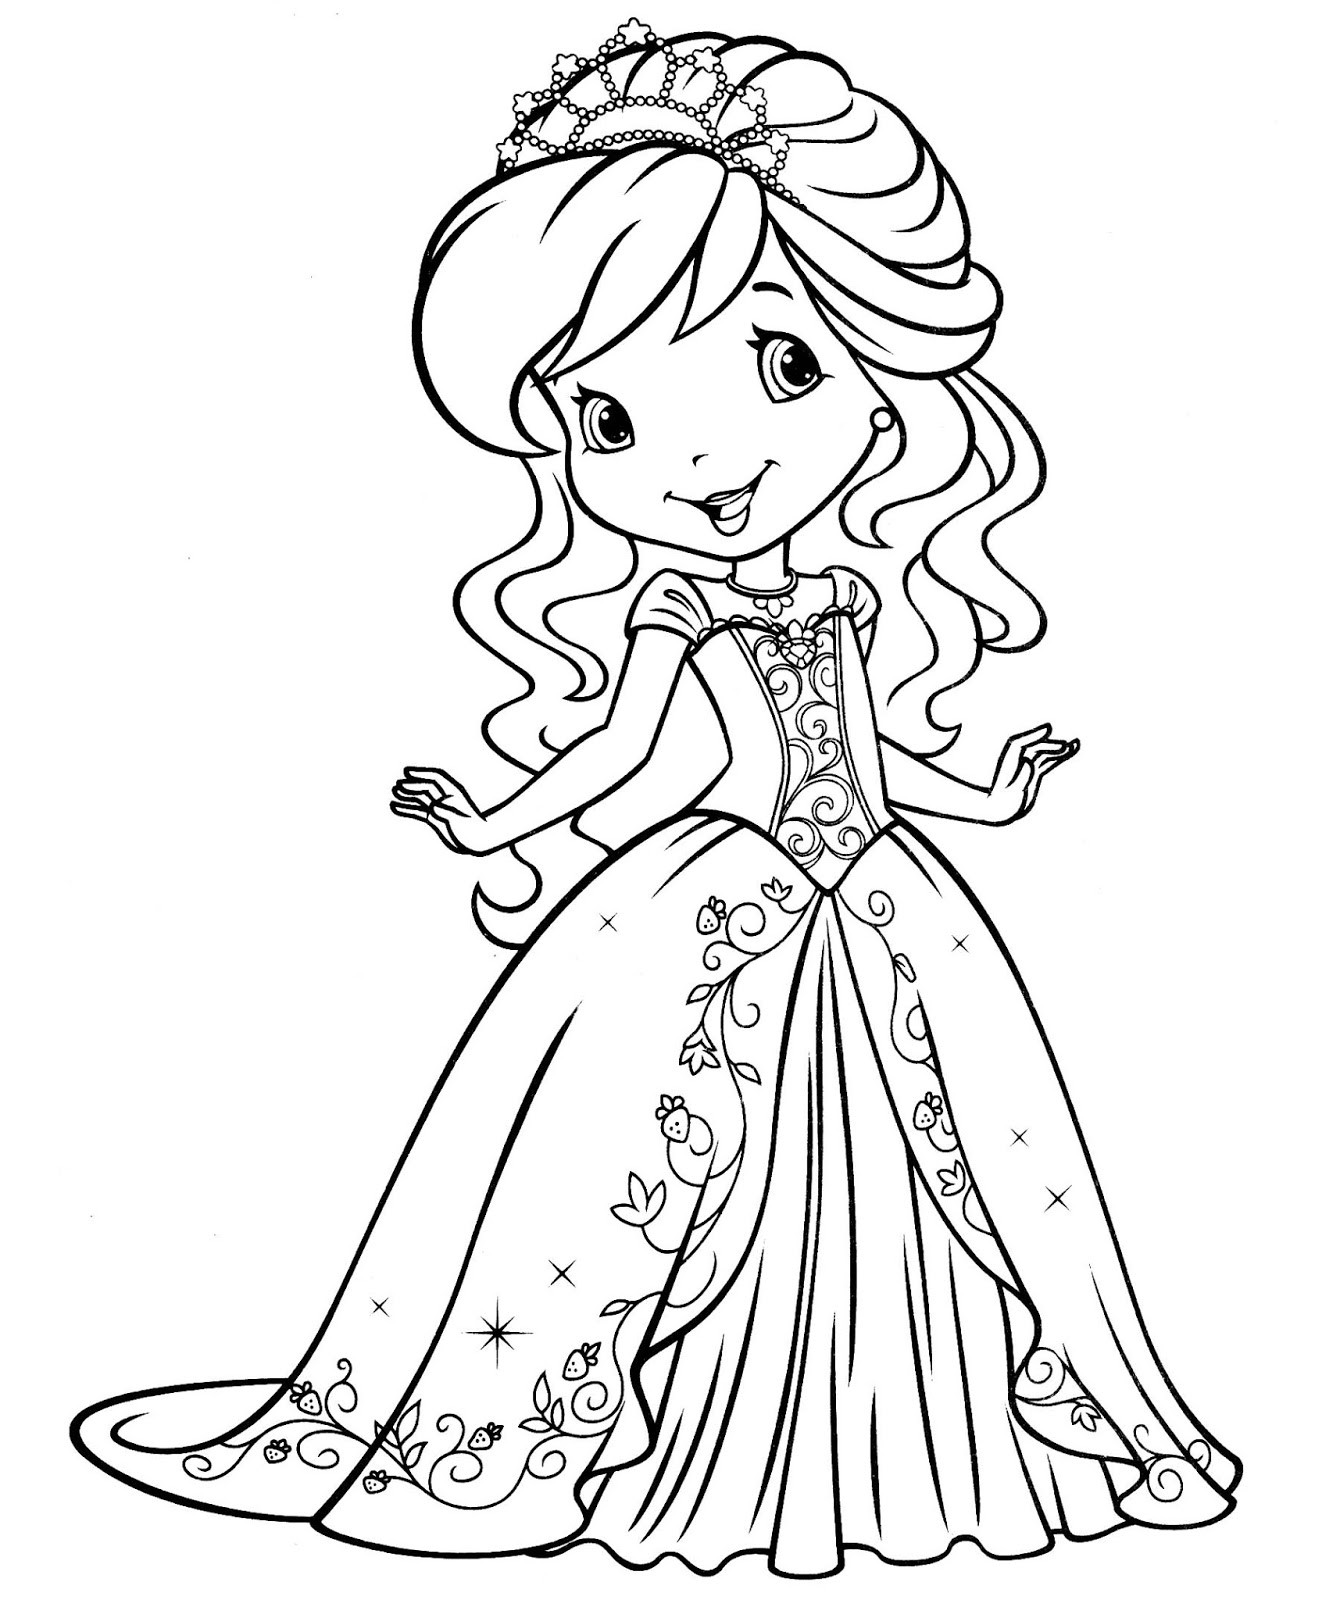 Pretty Girls Coloring Pages
 Coloring Pages for Girls Best Coloring Pages For Kids